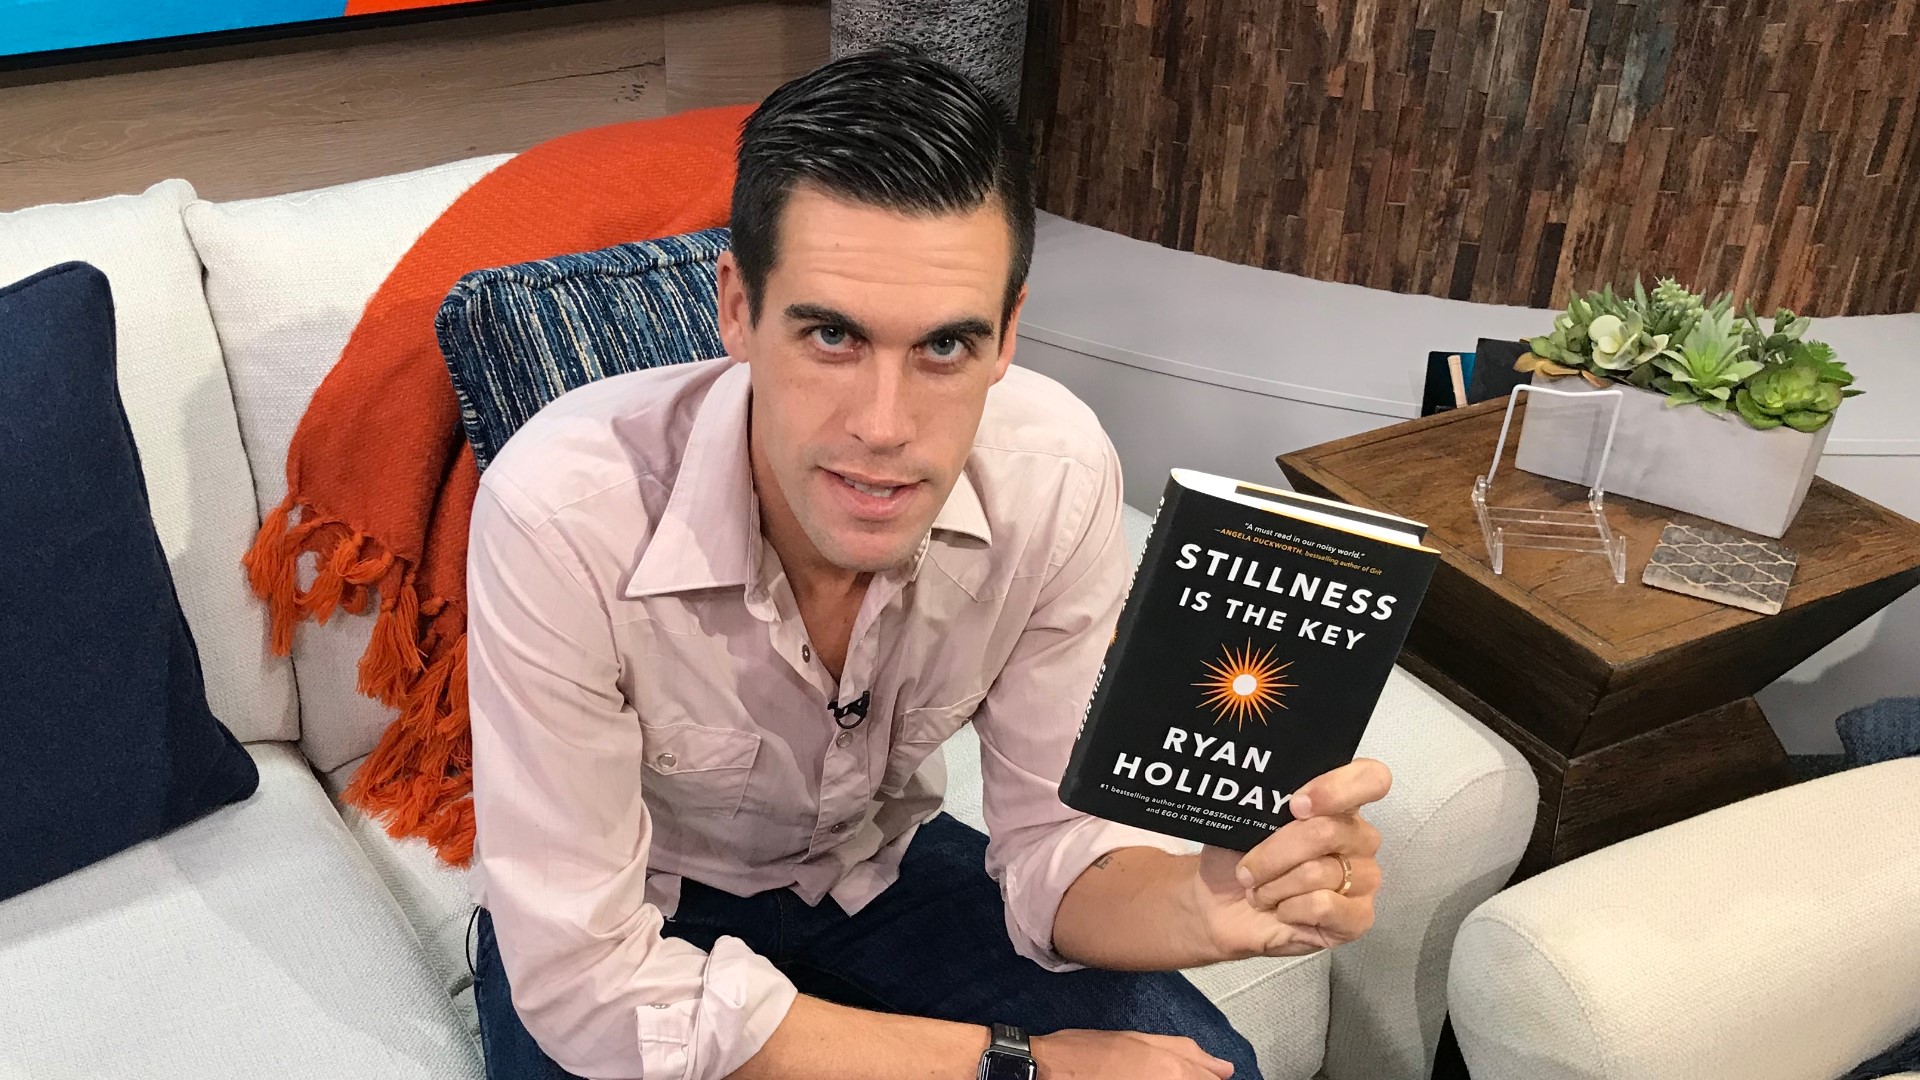 Bestselling author, Ryan Holiday, dives into history to demonstrate the power of stillness on the path to success.